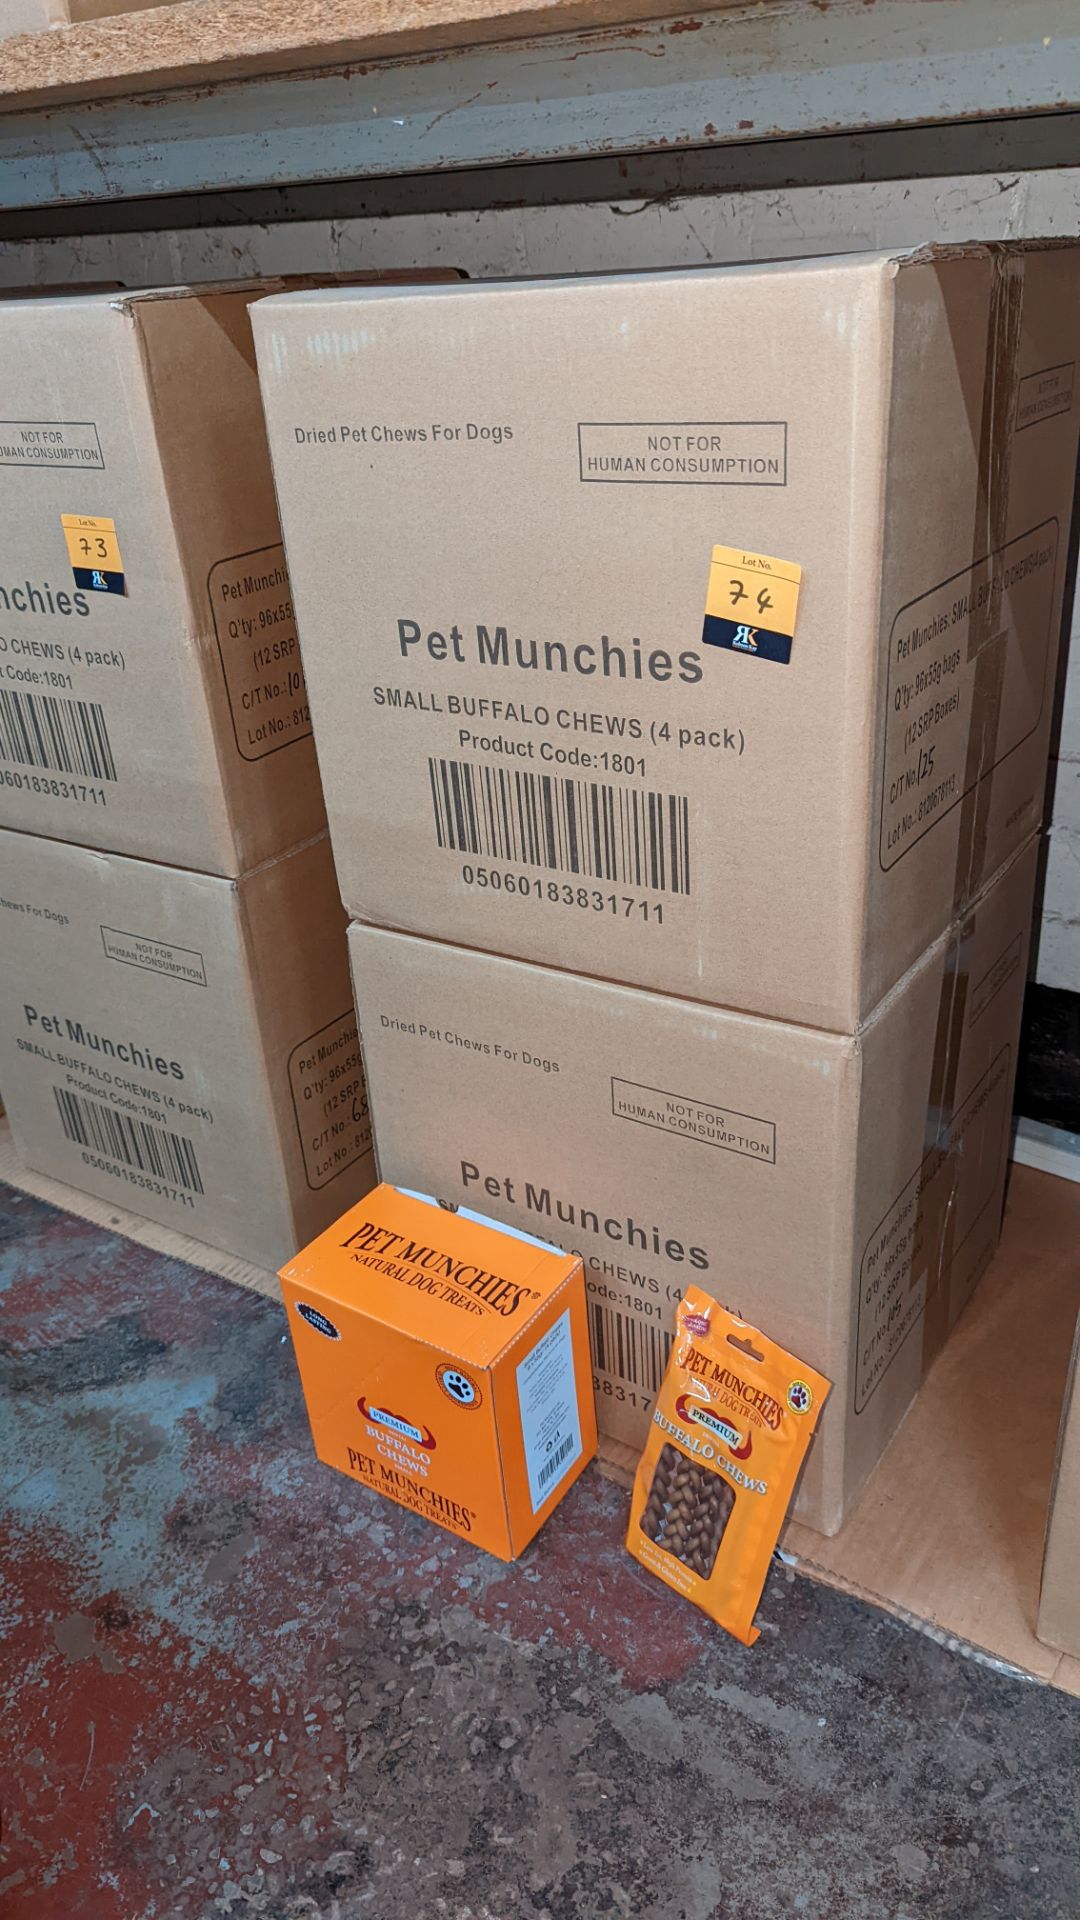 Pet Munchies dried pet chews for dogs. This lot consists of a total of 24 orange retail display box - Image 2 of 3